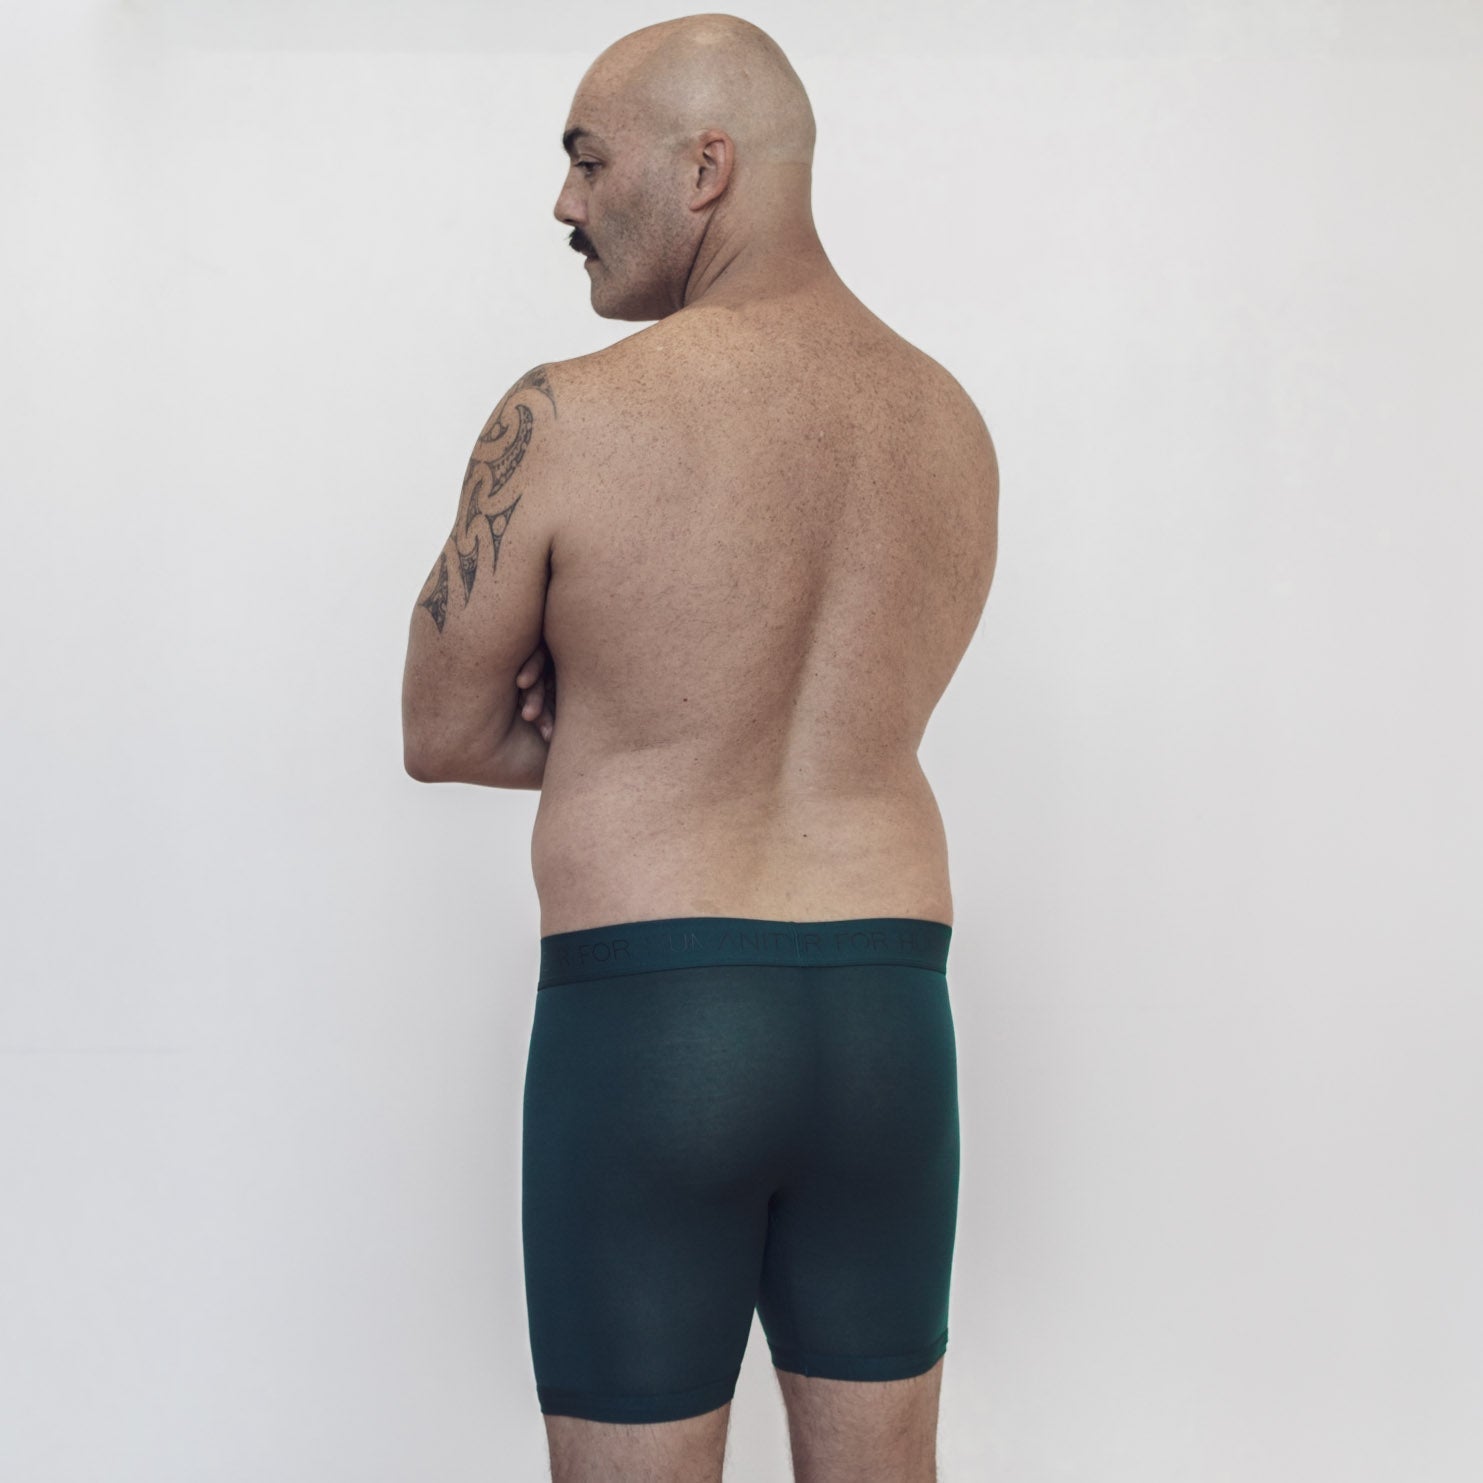 Sustainable, ethically made atlantis trunk style underwear. Long leg, wide thigh fit with elastic bind, no riding, cup support close to the body. made with tencel fabric and recycled elastic, thin, no dig waist band. Model wears shorts